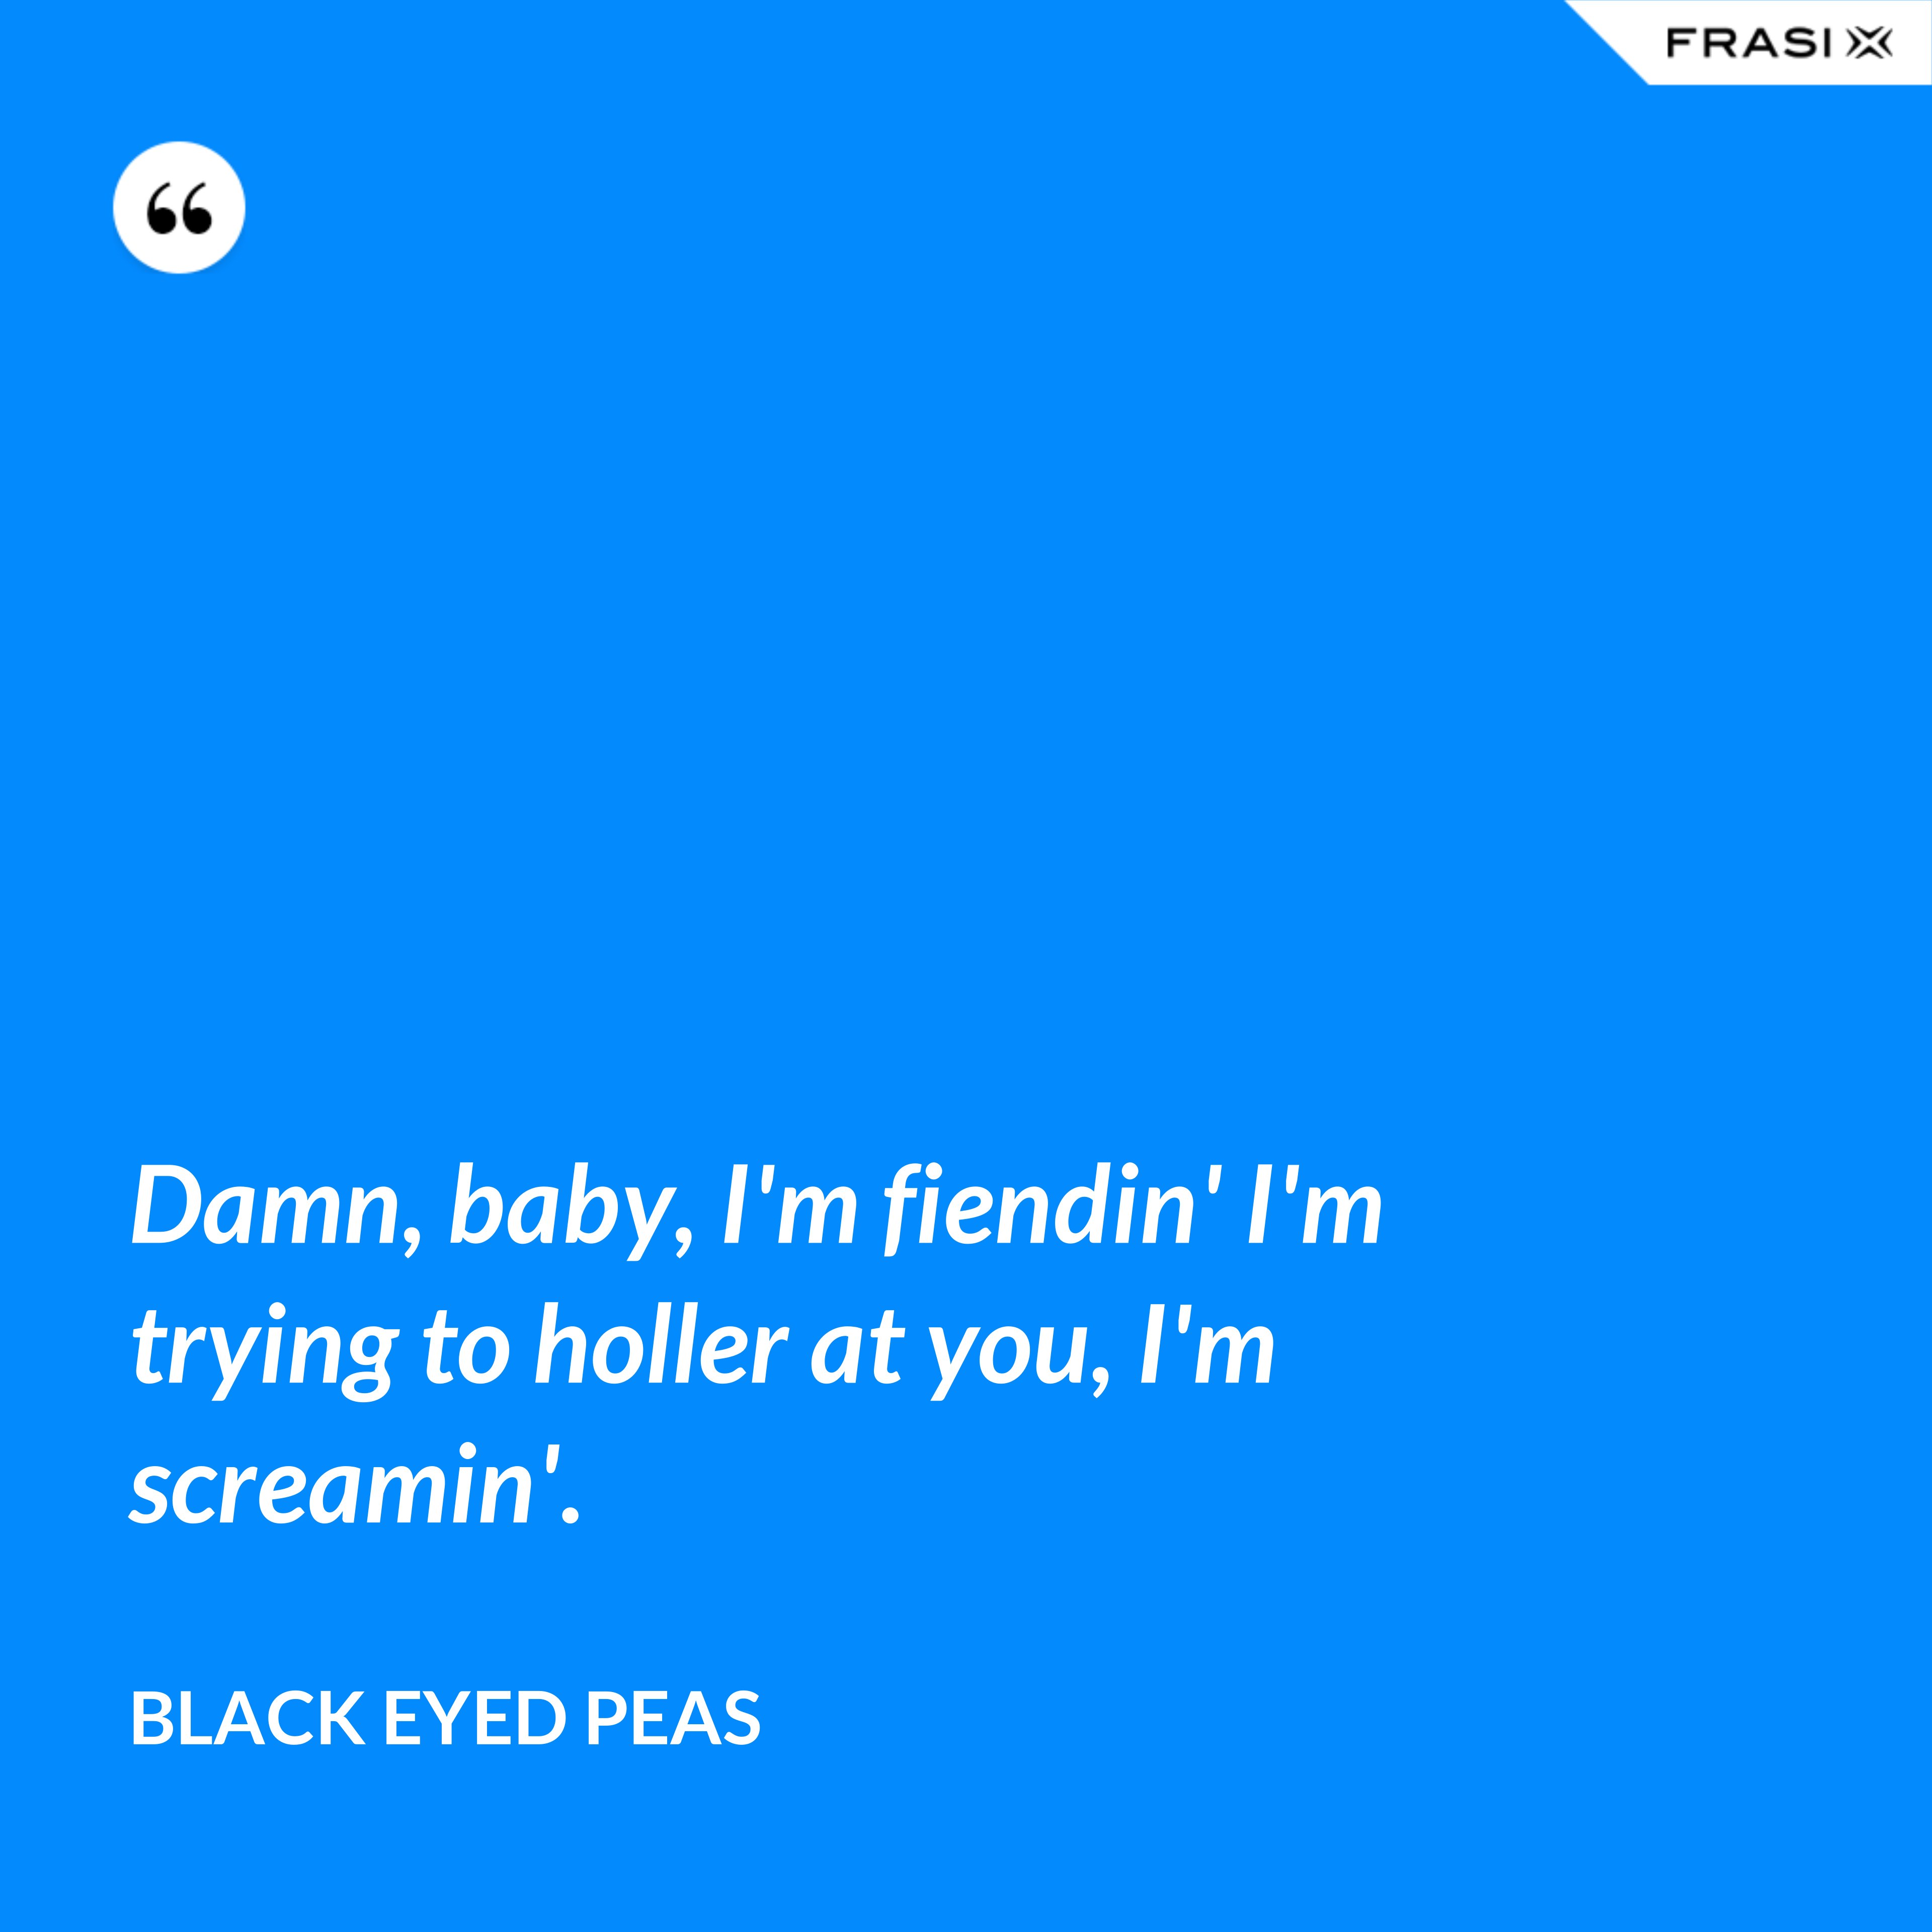 Damn, baby, I'm fiendin' I'm trying to holler at you, I'm screamin'. - Black Eyed Peas